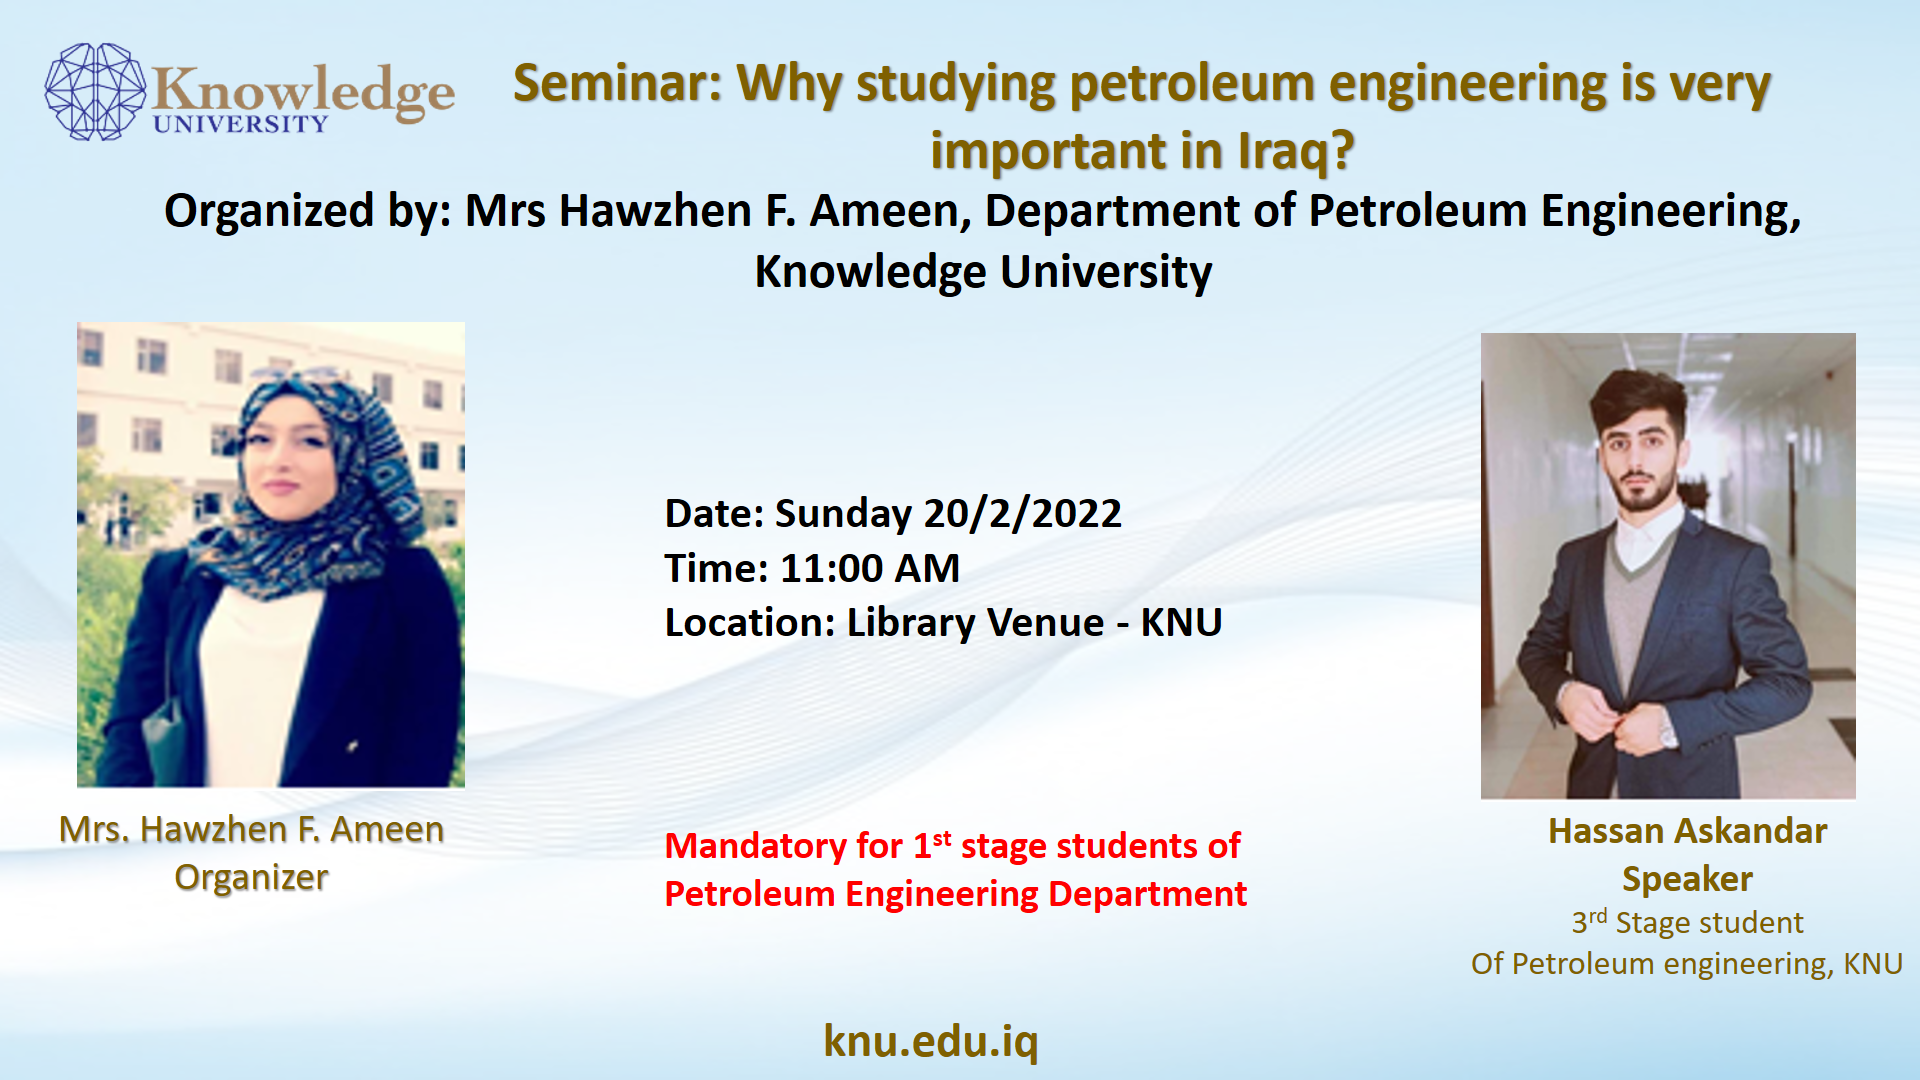 Why studying petroleum engineering is very important in Iraq?